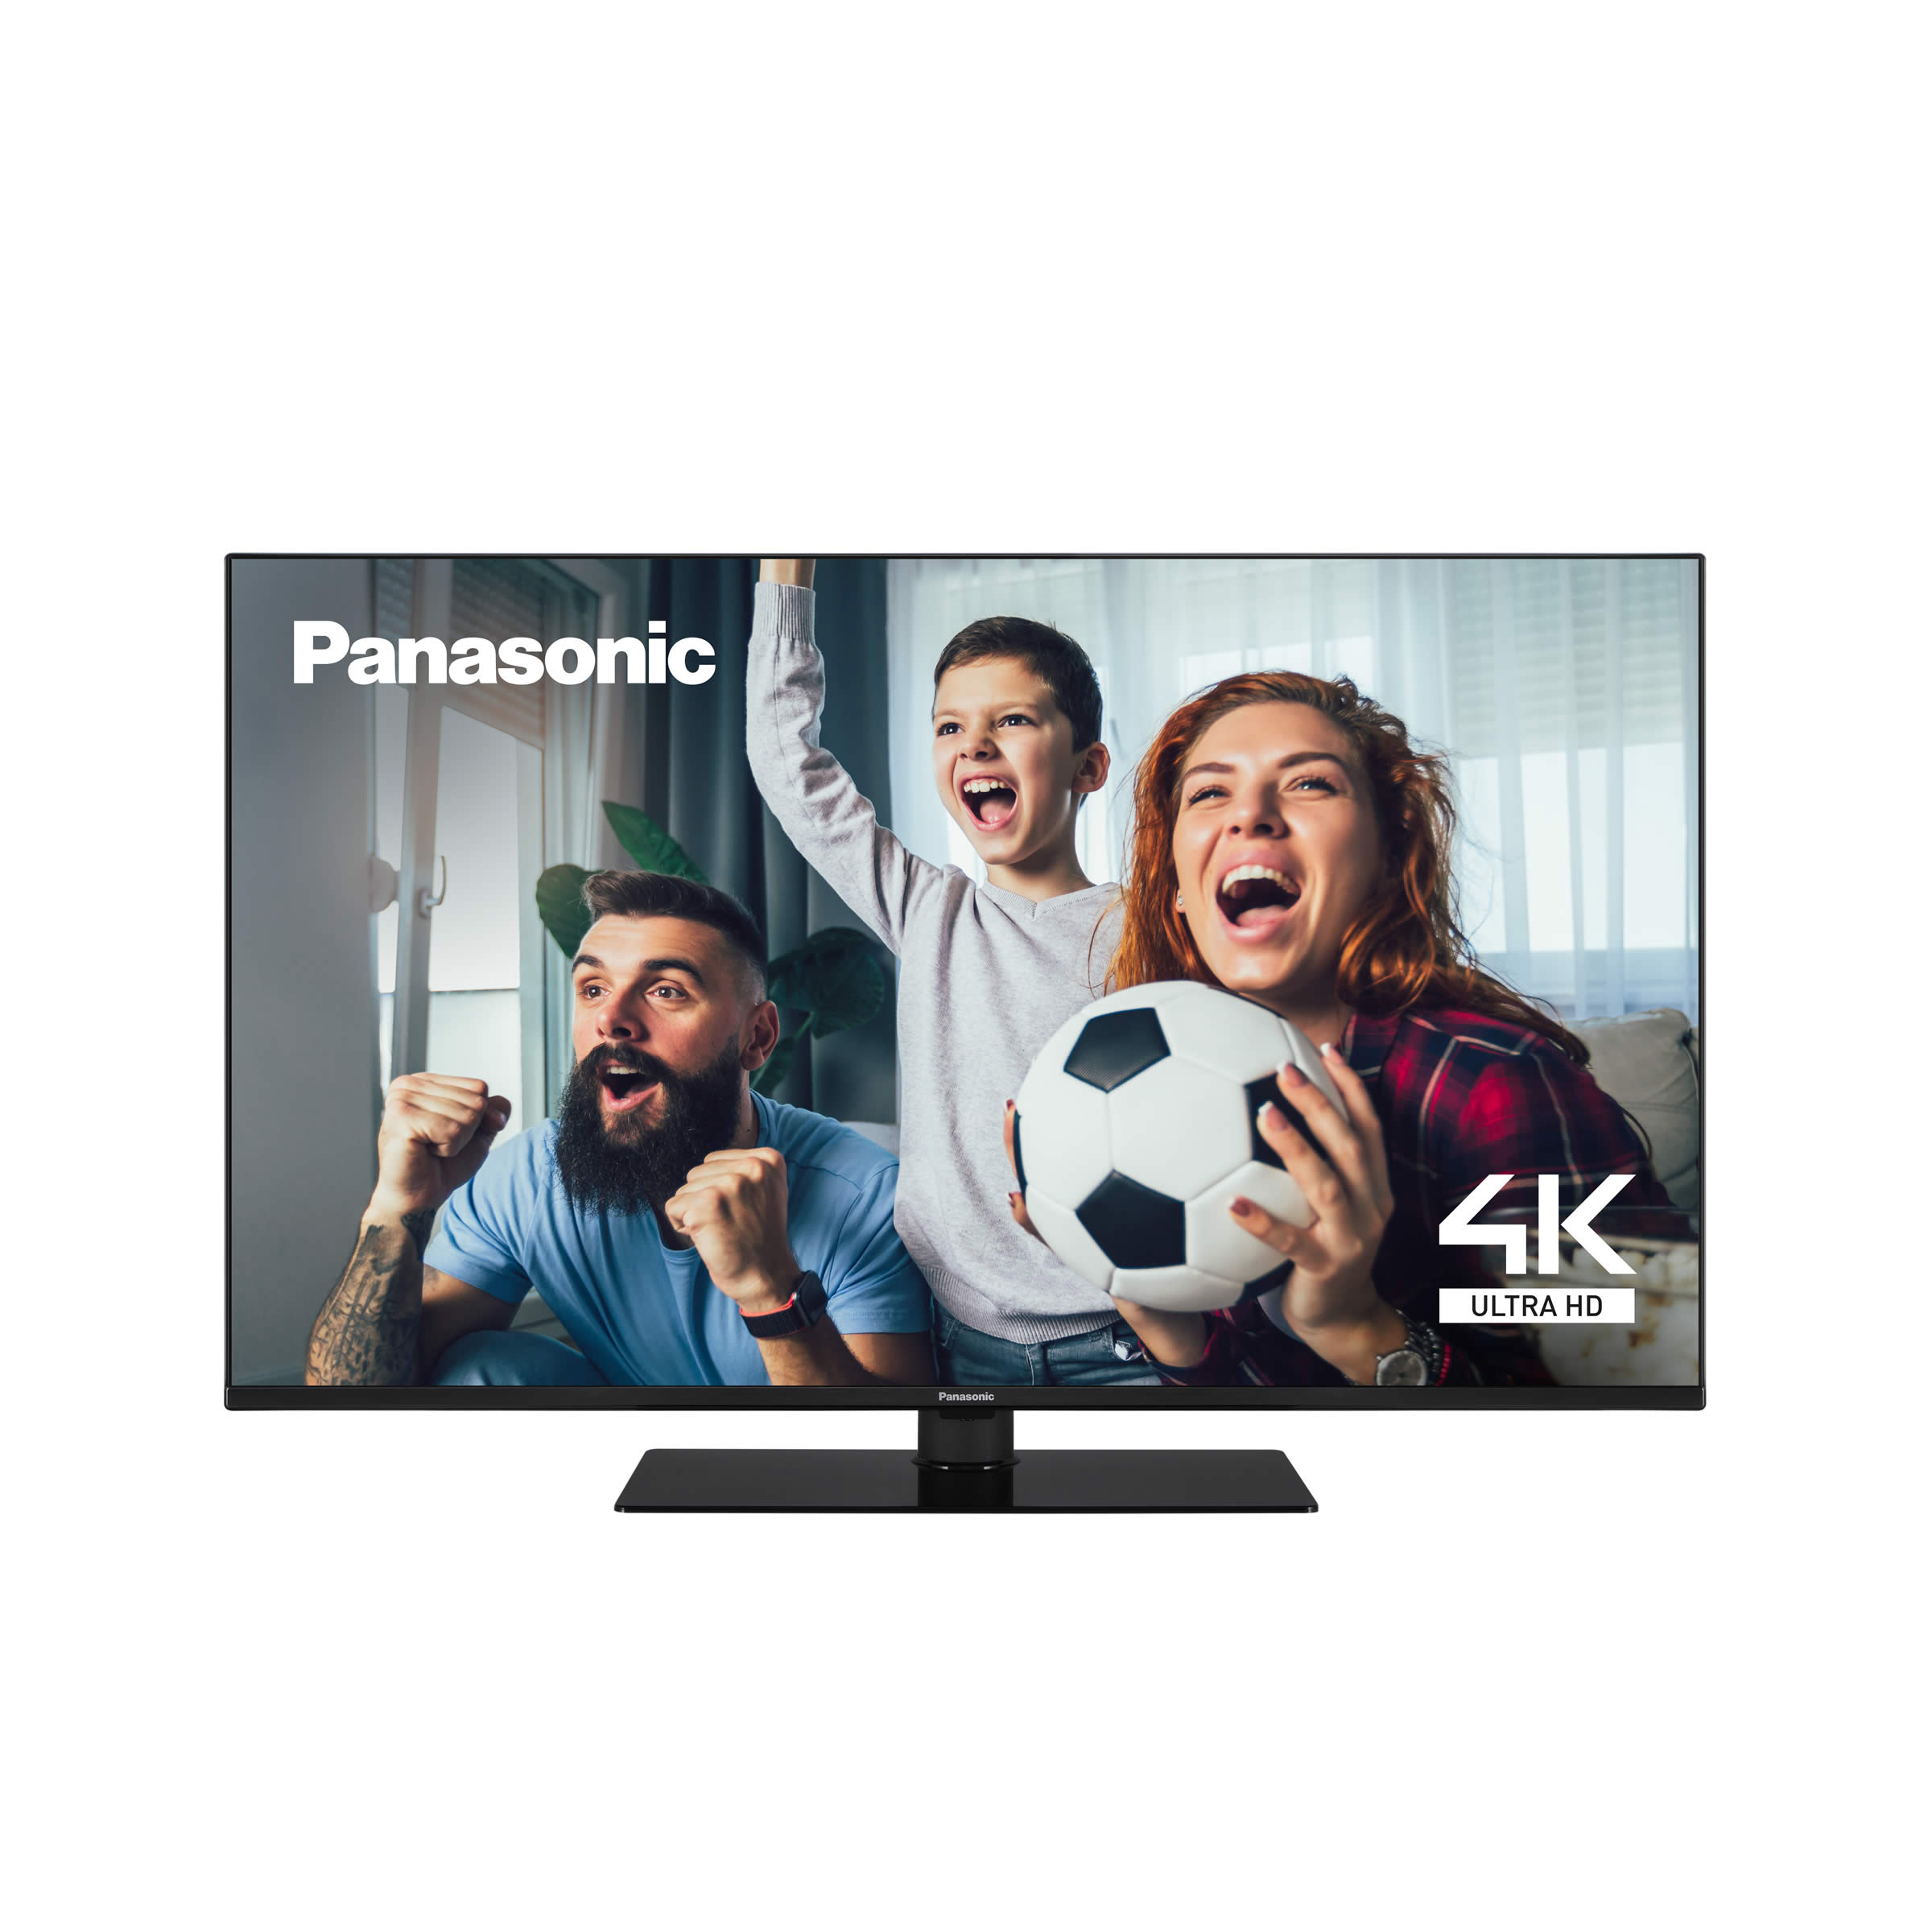 Panasonic 43inch Ultra HD 4K LED HDR10 SMART TV WiFi Android